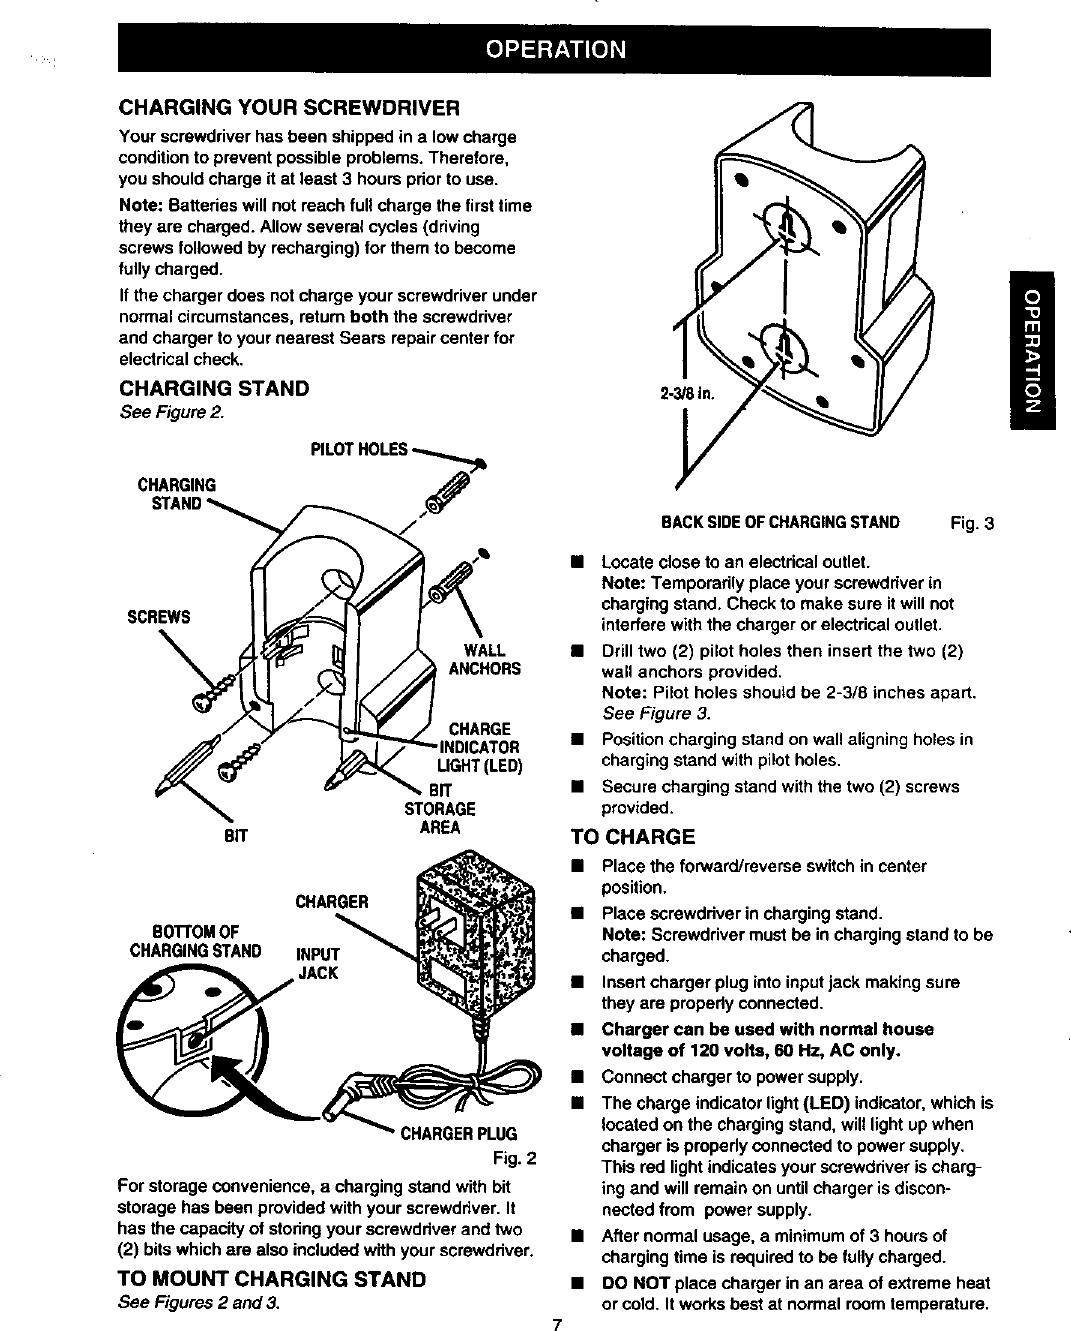 Page 7 of 12 - Craftsman 315111810 User Manual  SINGLE SPEED REVERSIBLE CORDLESS SCREWDRIVER - Manuals And Guides 98100166